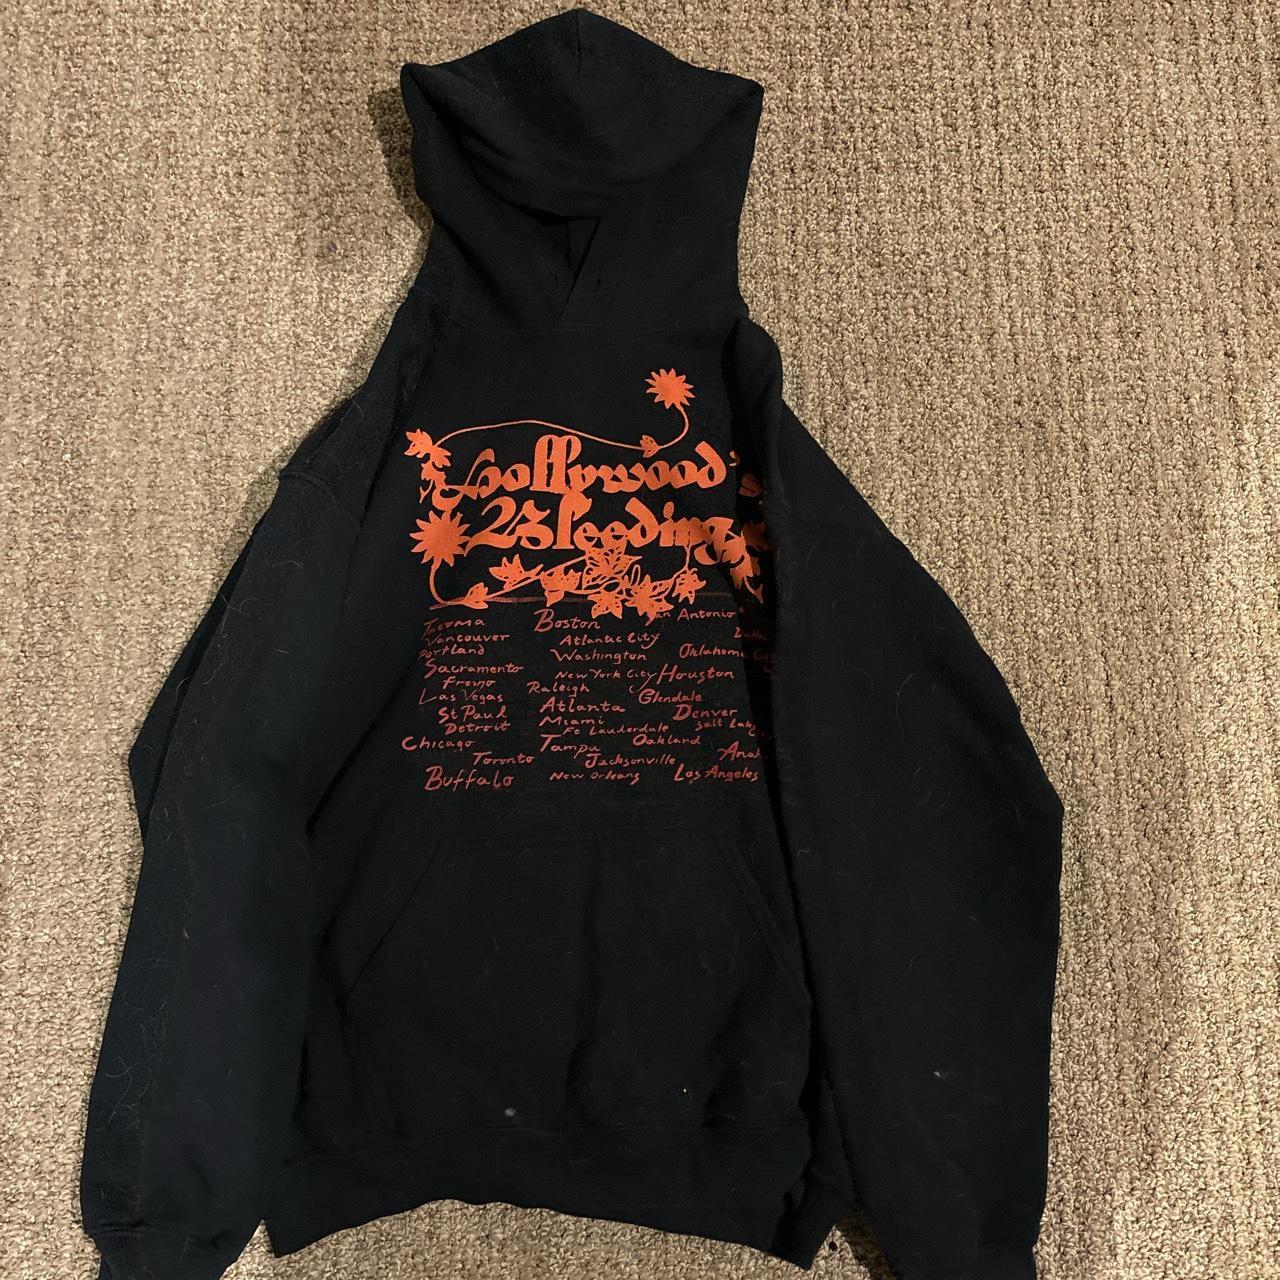 Small post Malone concert hoodie worn about 5 times - Depop